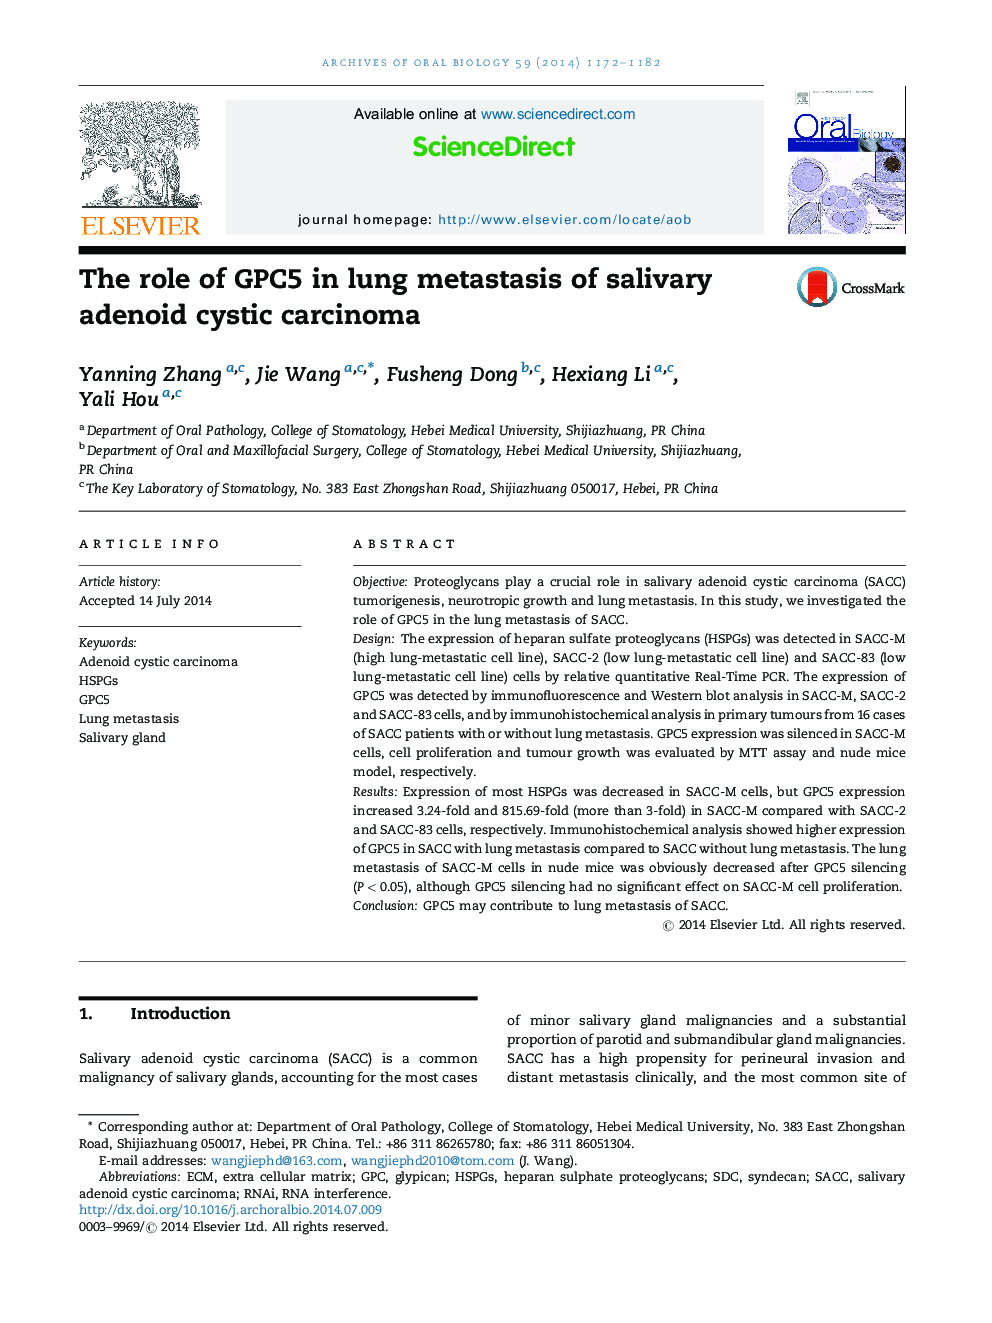 The role of GPC5 in lung metastasis of salivary adenoid cystic carcinoma